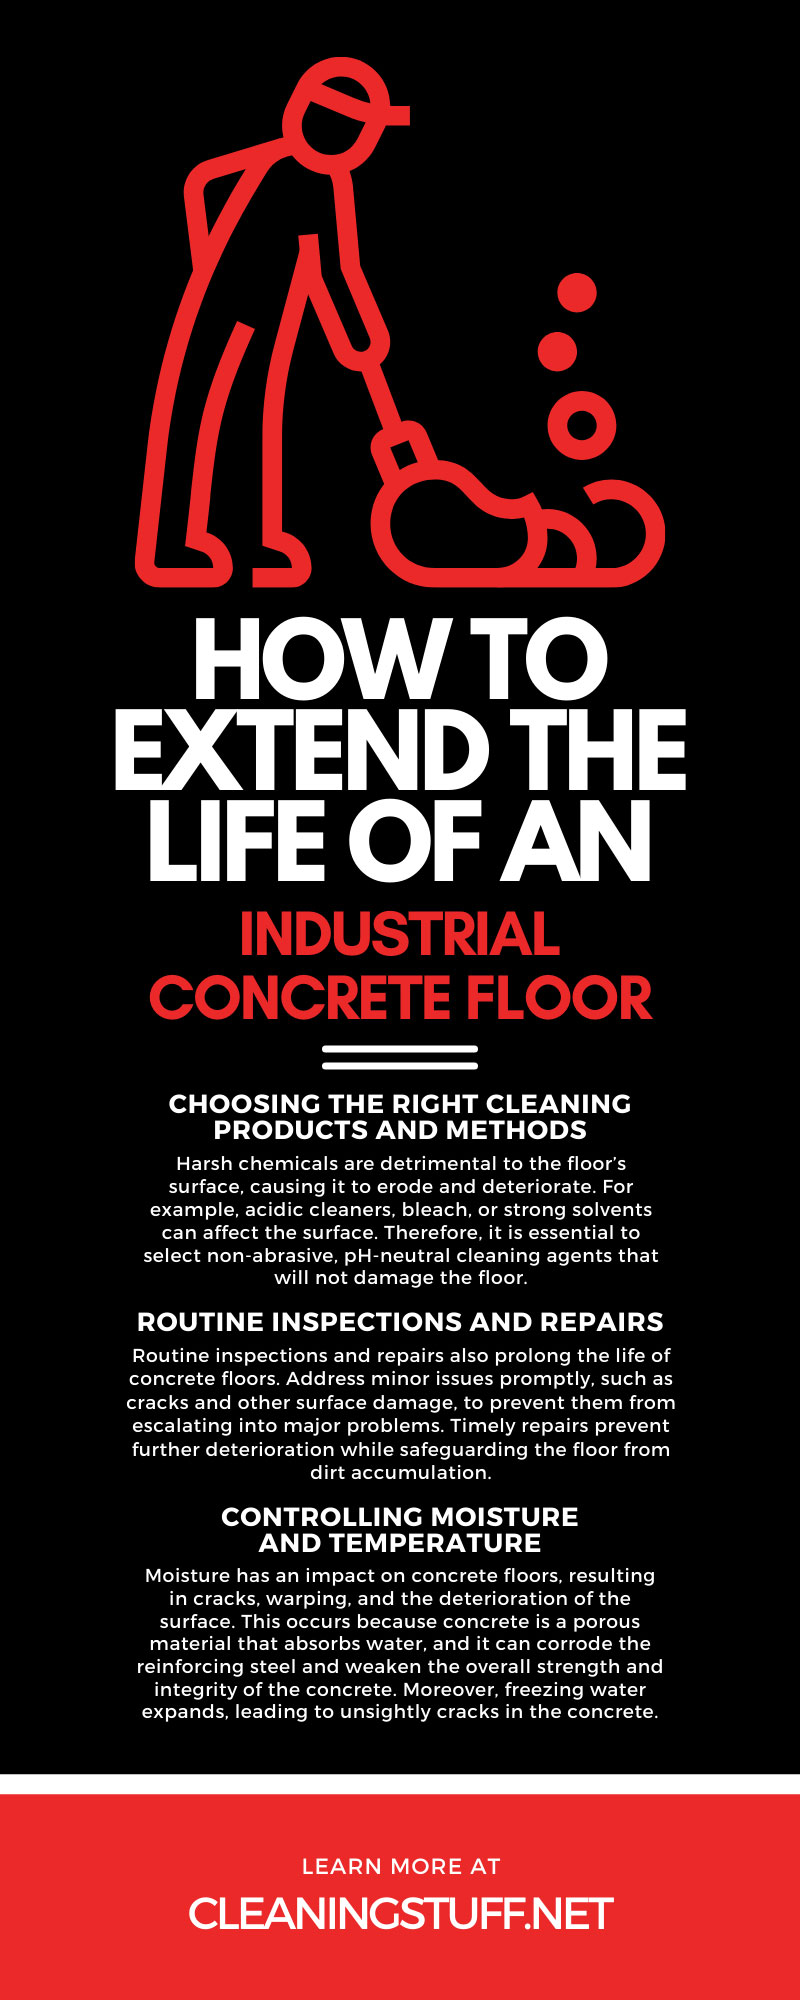 How To Extend the Life of an Industrial Concrete Floor